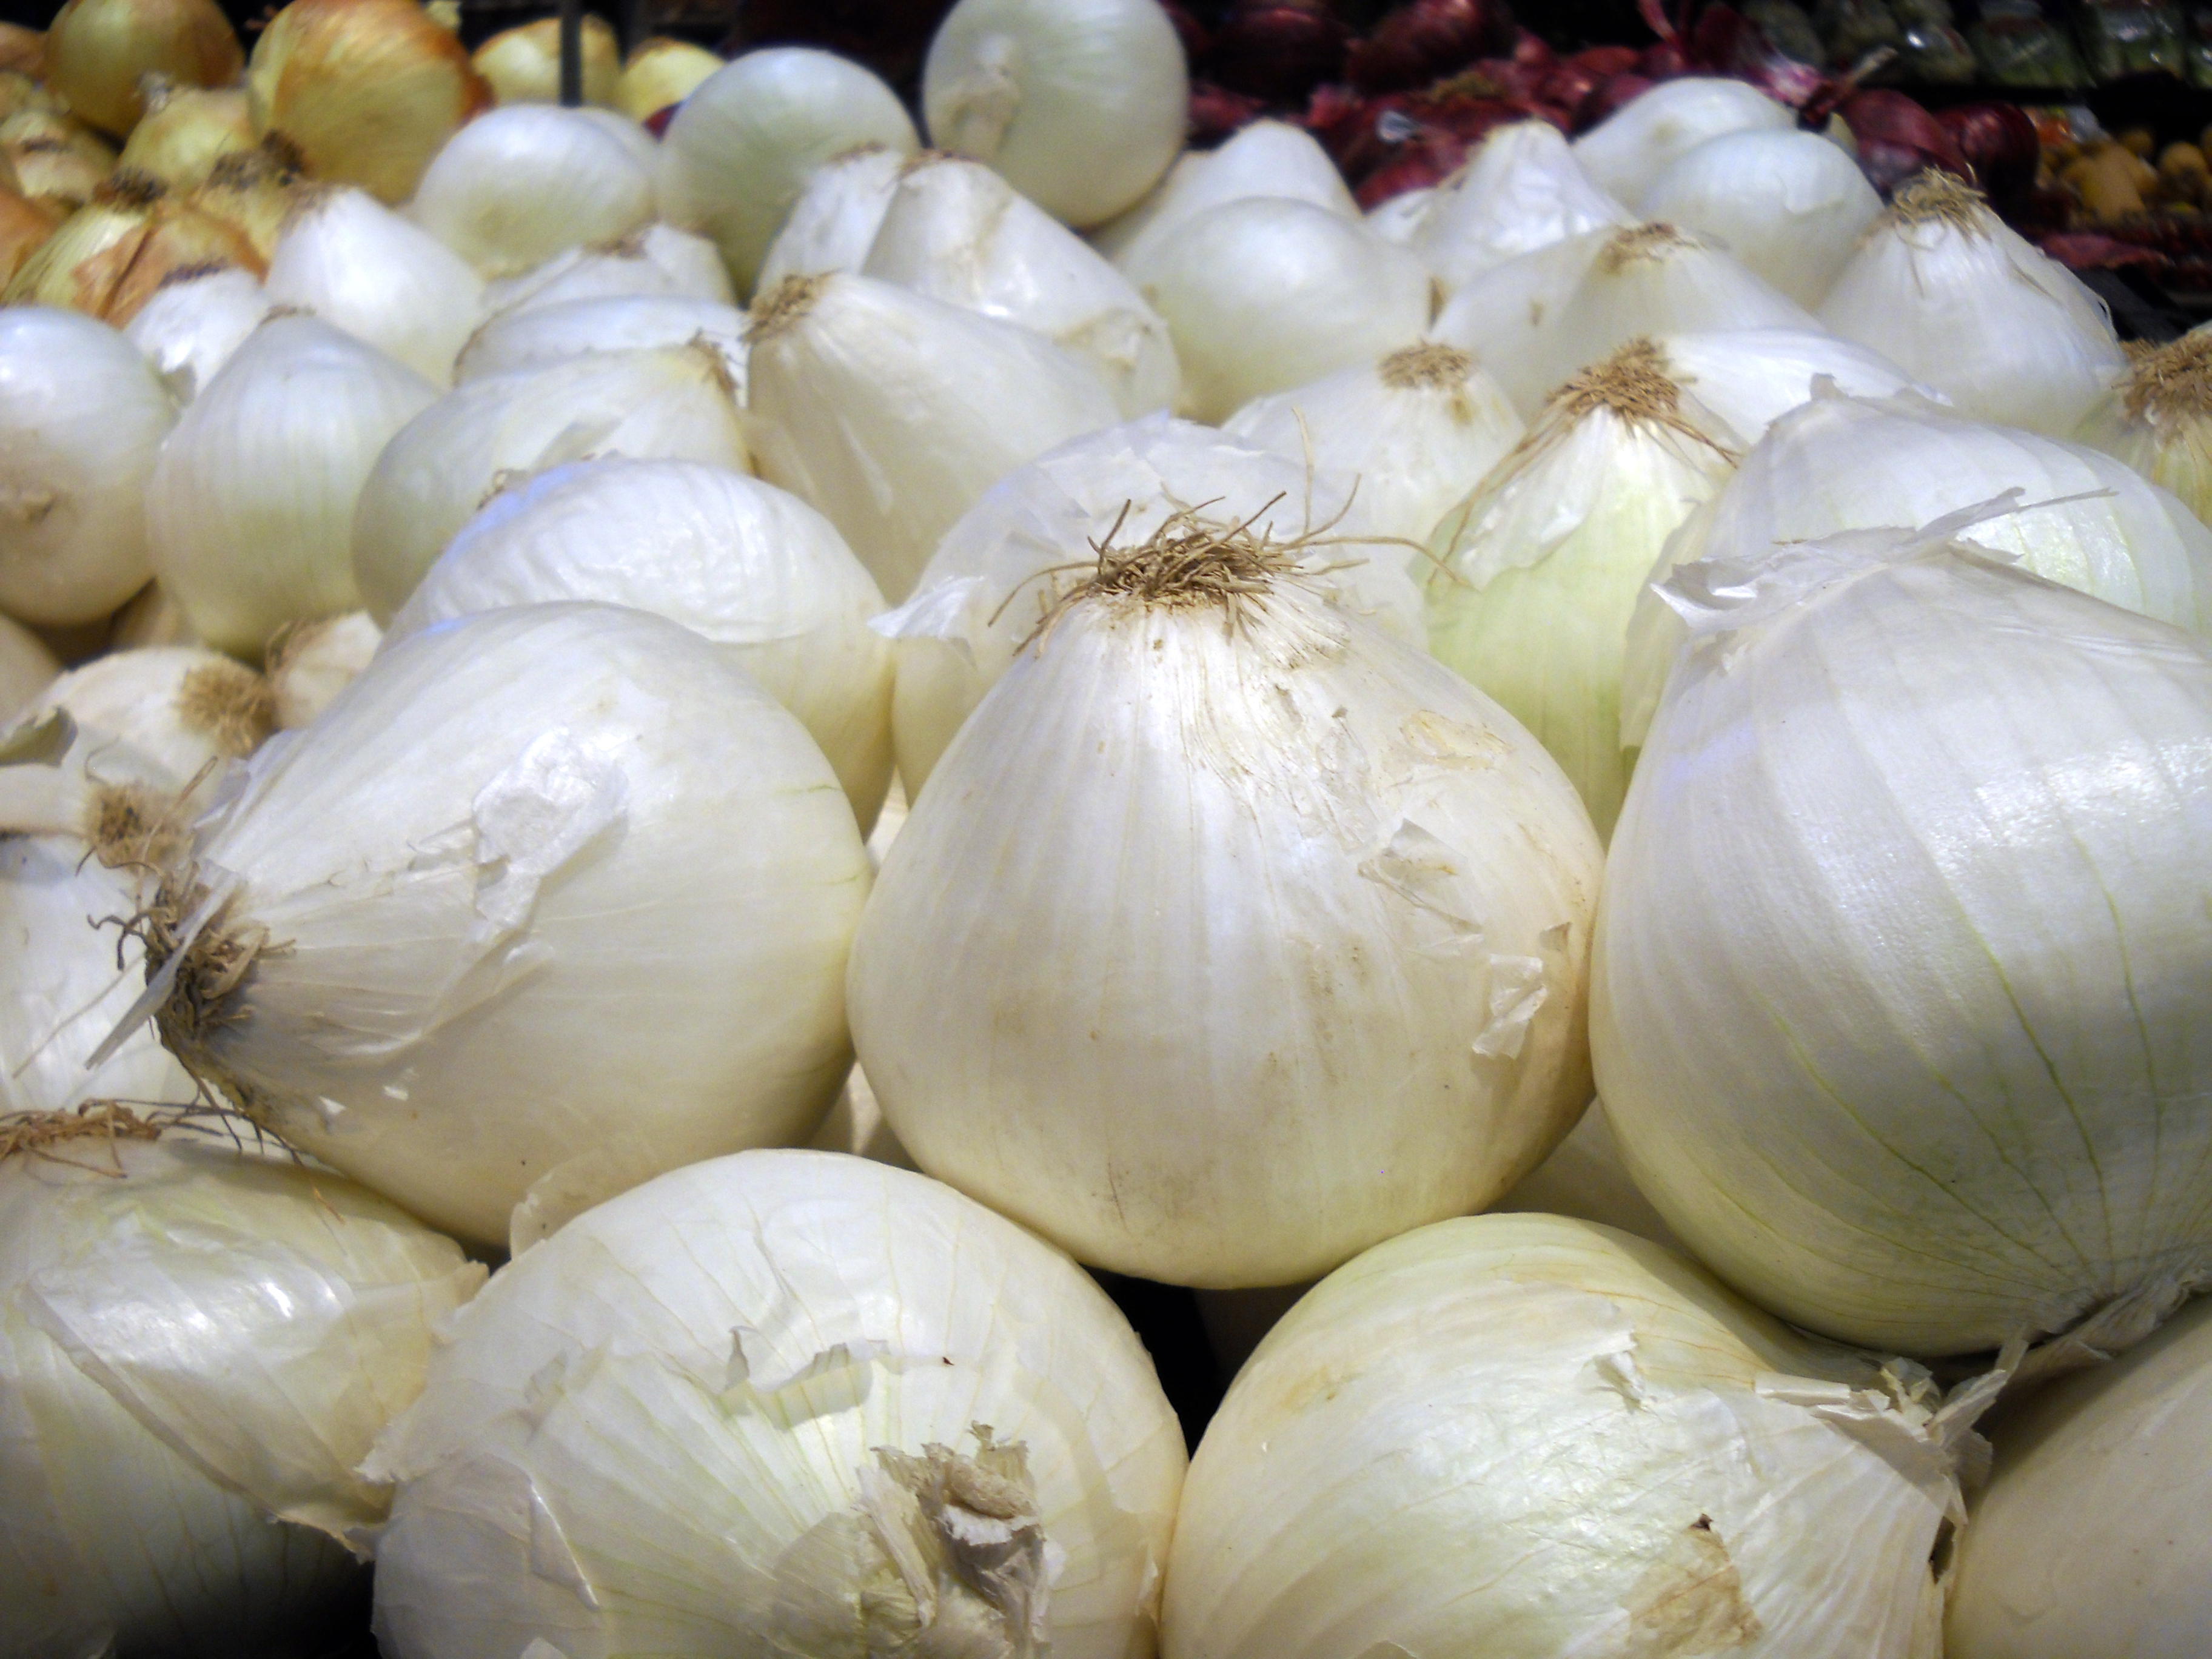 Onion Best Choice To Get Rid Of Acne Scars